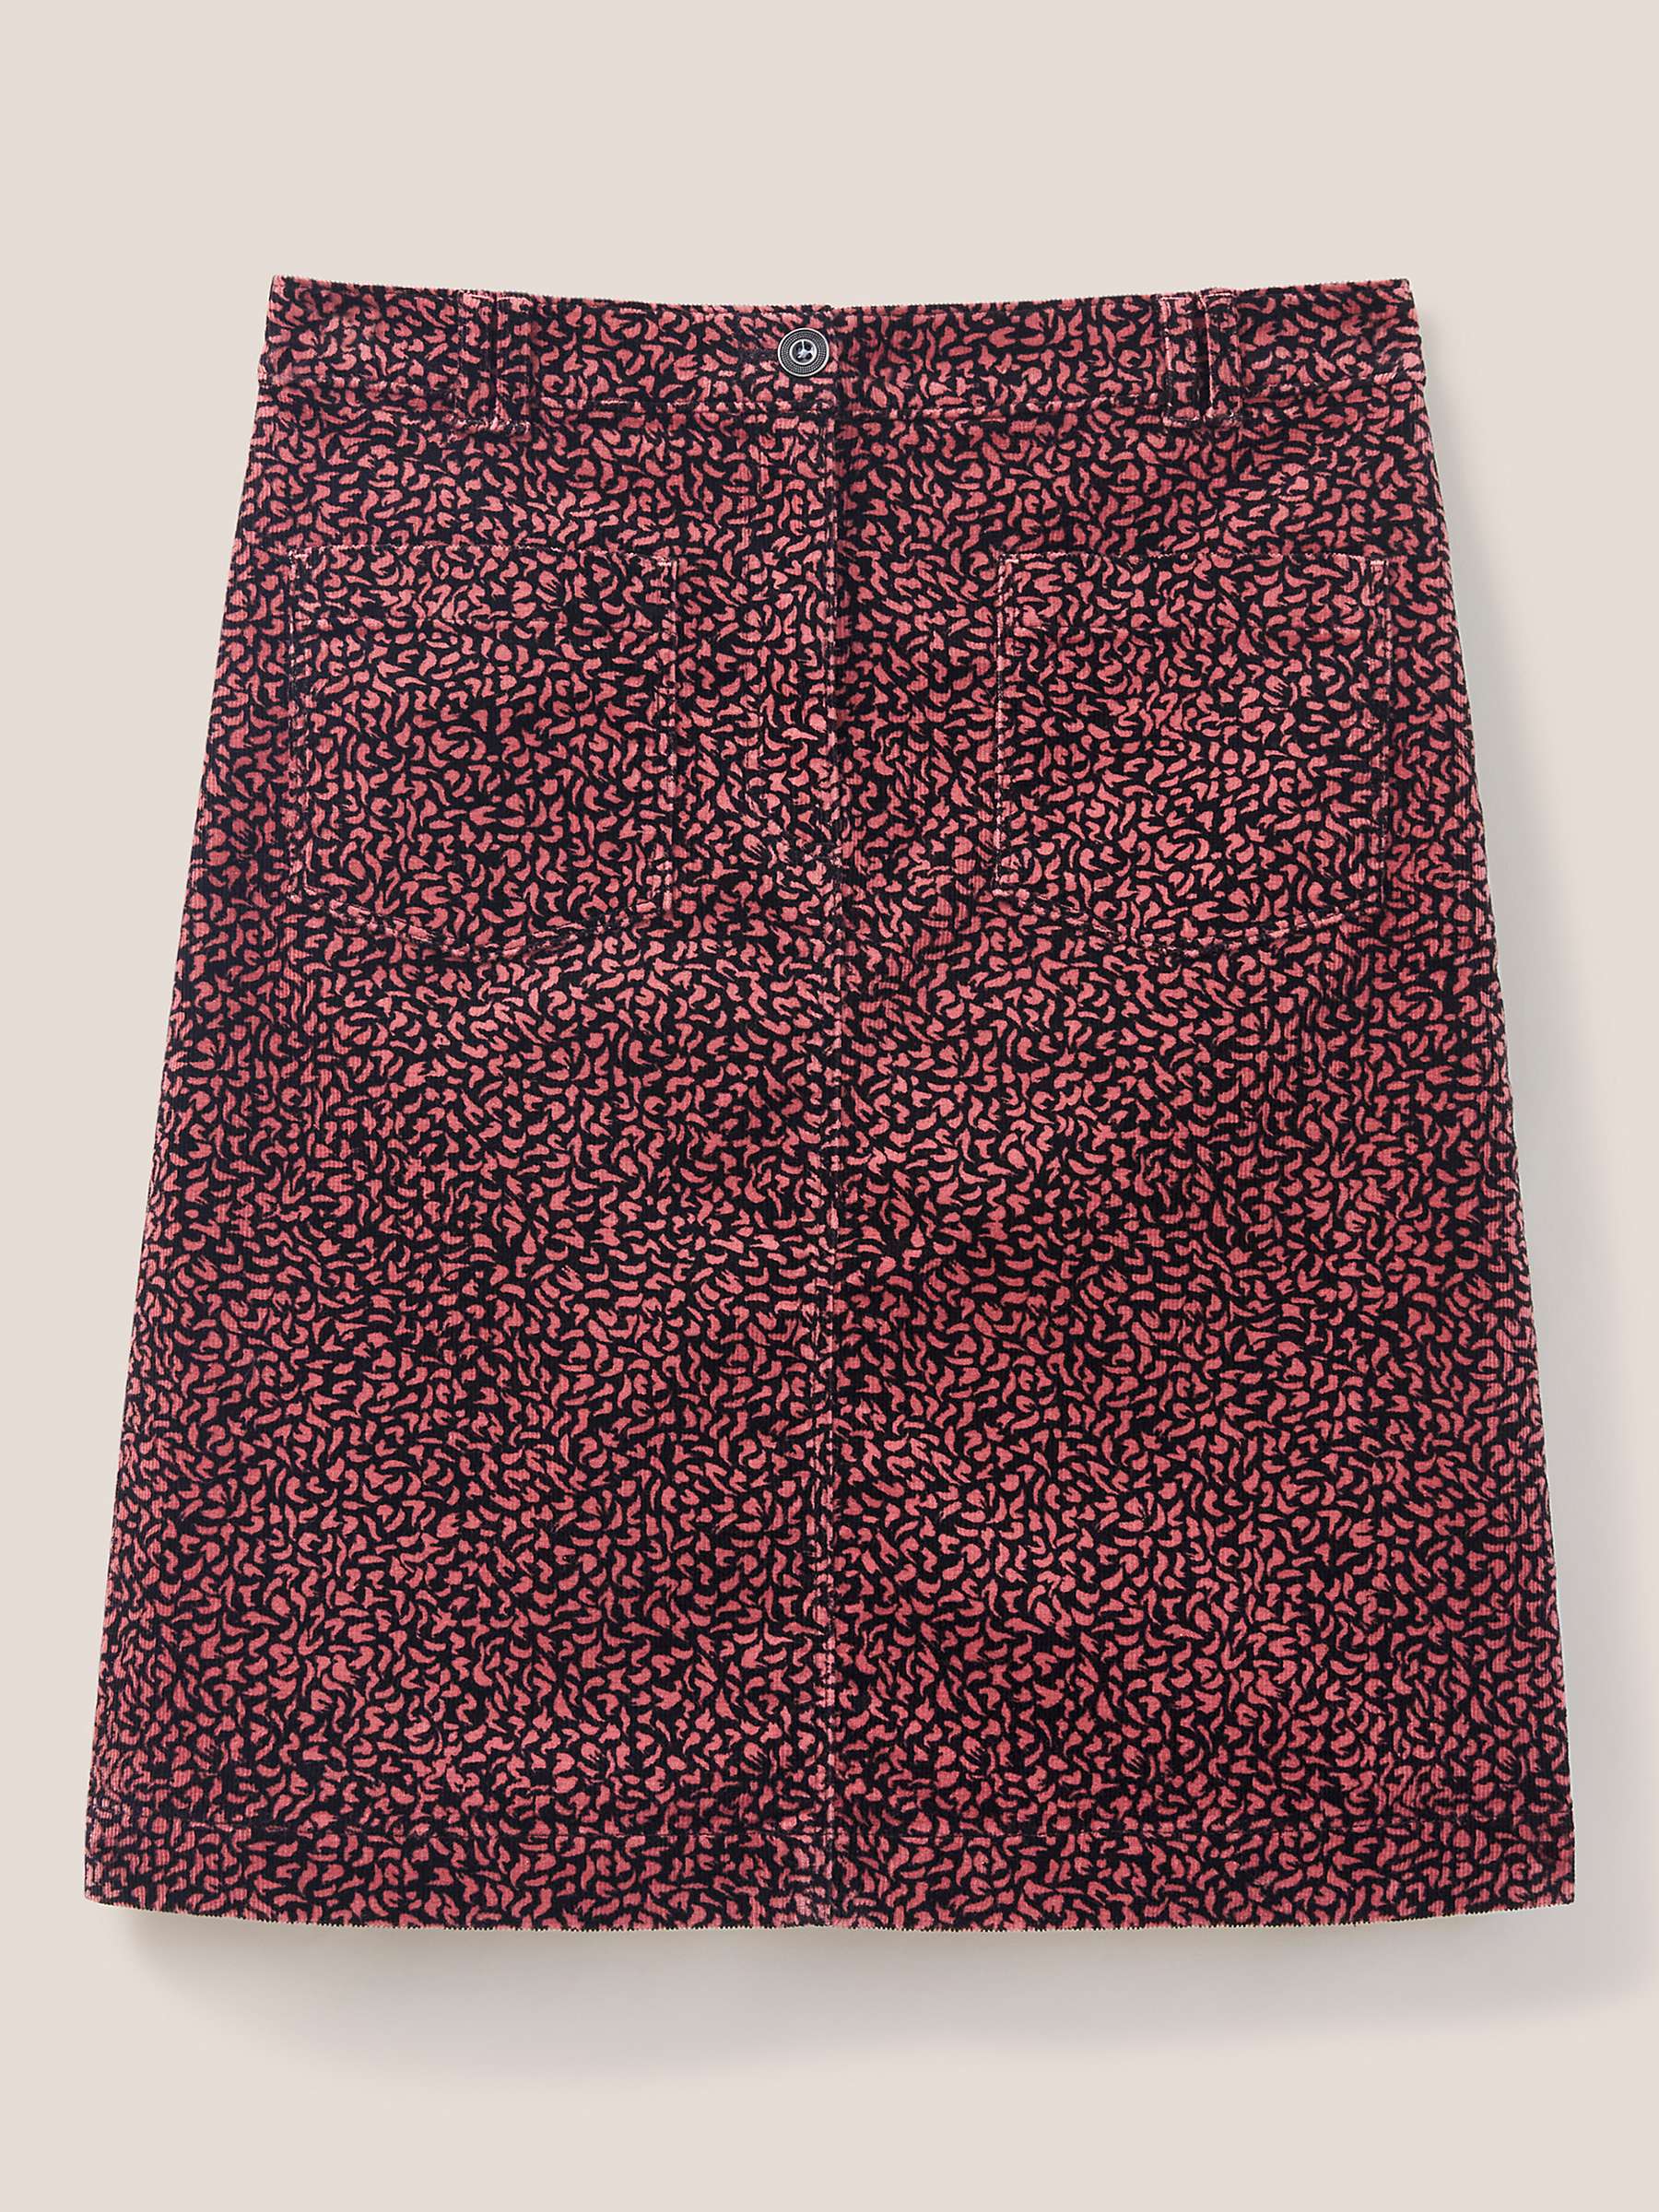 Buy White Stuff Abstract Print Organic Cotton Cord Skirt, Pink/Multi Online at johnlewis.com